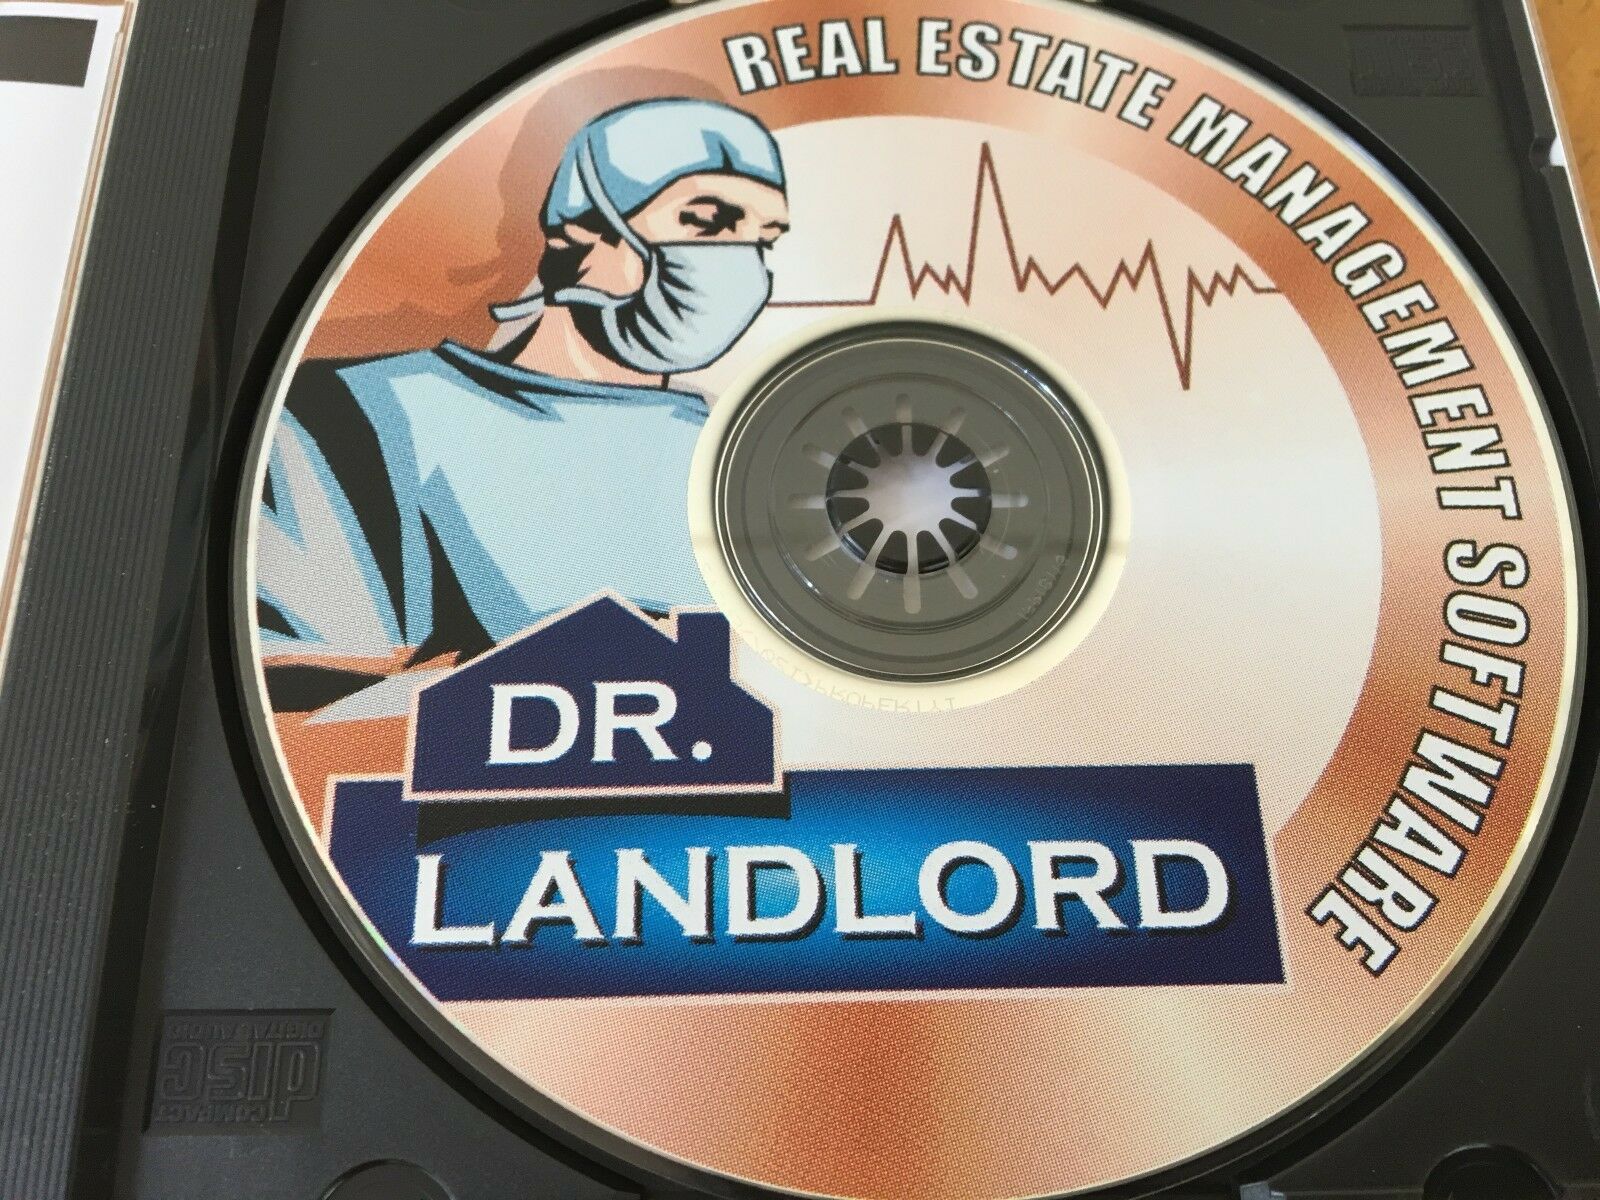 Dr. Landlord Real Estate Management Software On Cd - Bronze Edition!  Brand New!